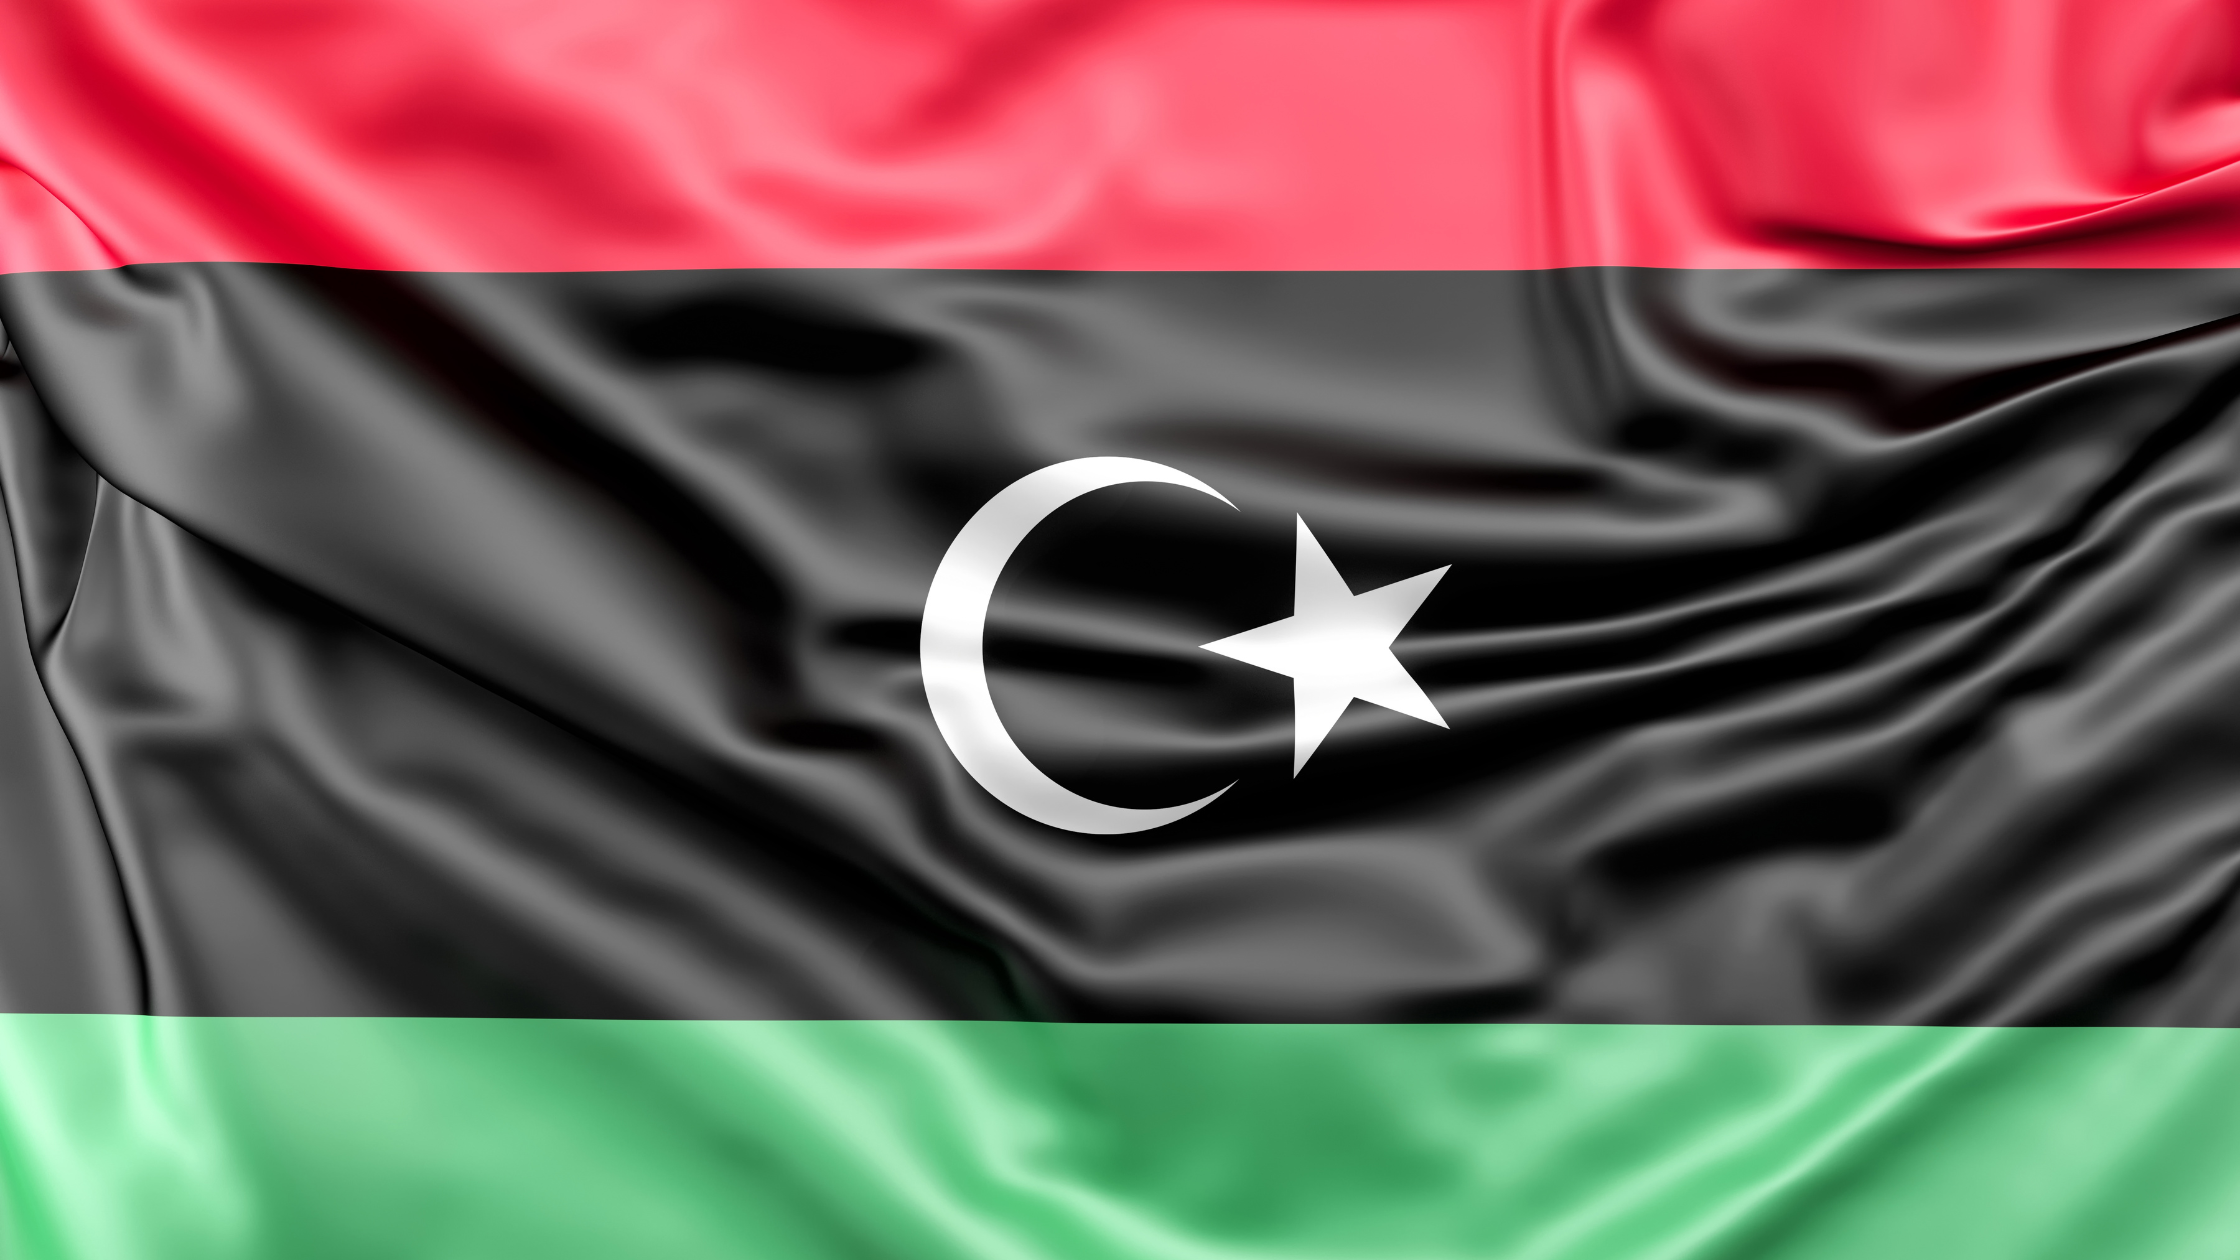 Taxation in Libya: Country to Exempt Private Sector From Tax